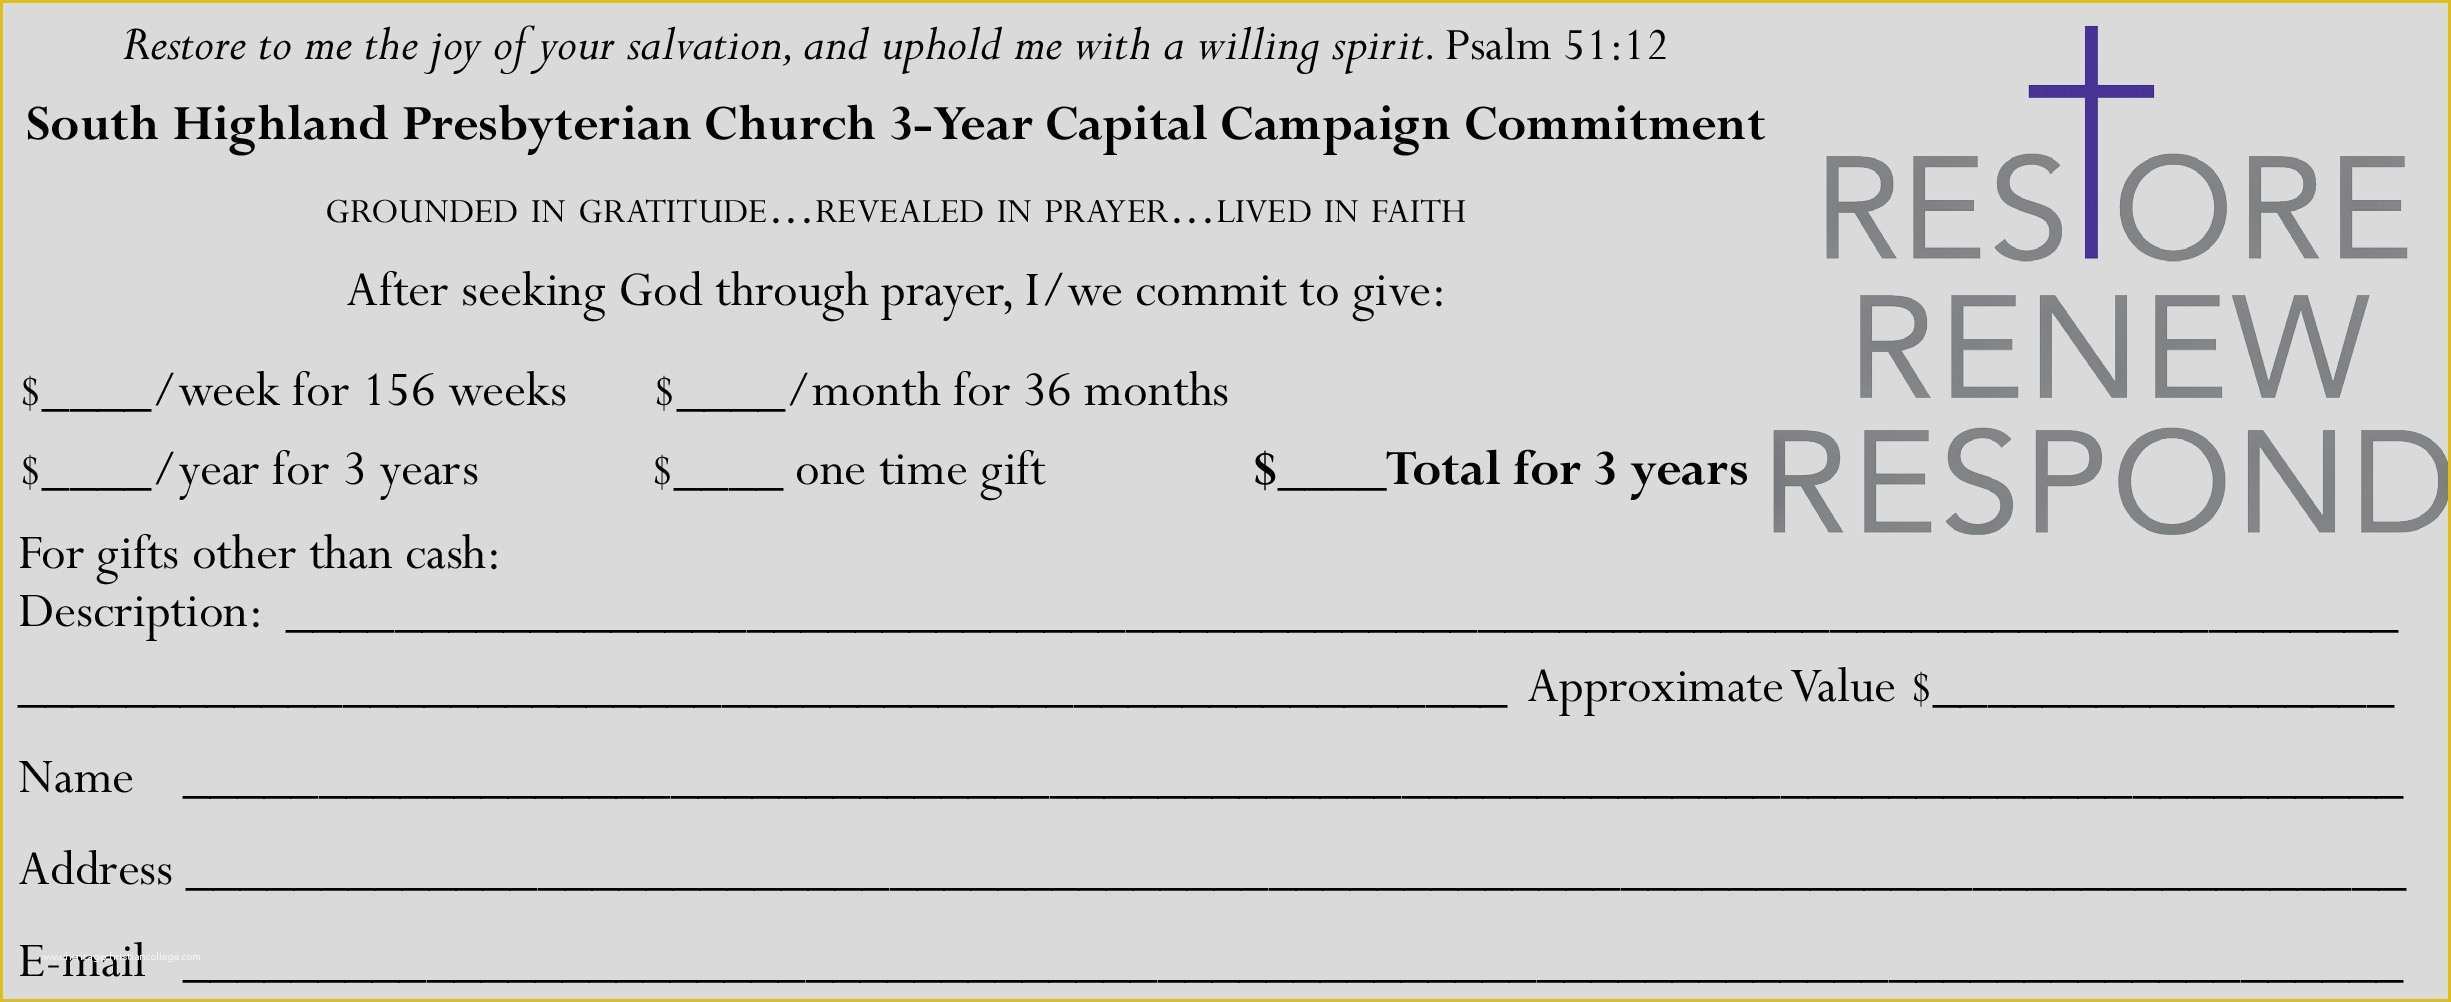 Free Campaign Cards Template Of south Highland Presbyterian Church Pledge Cards